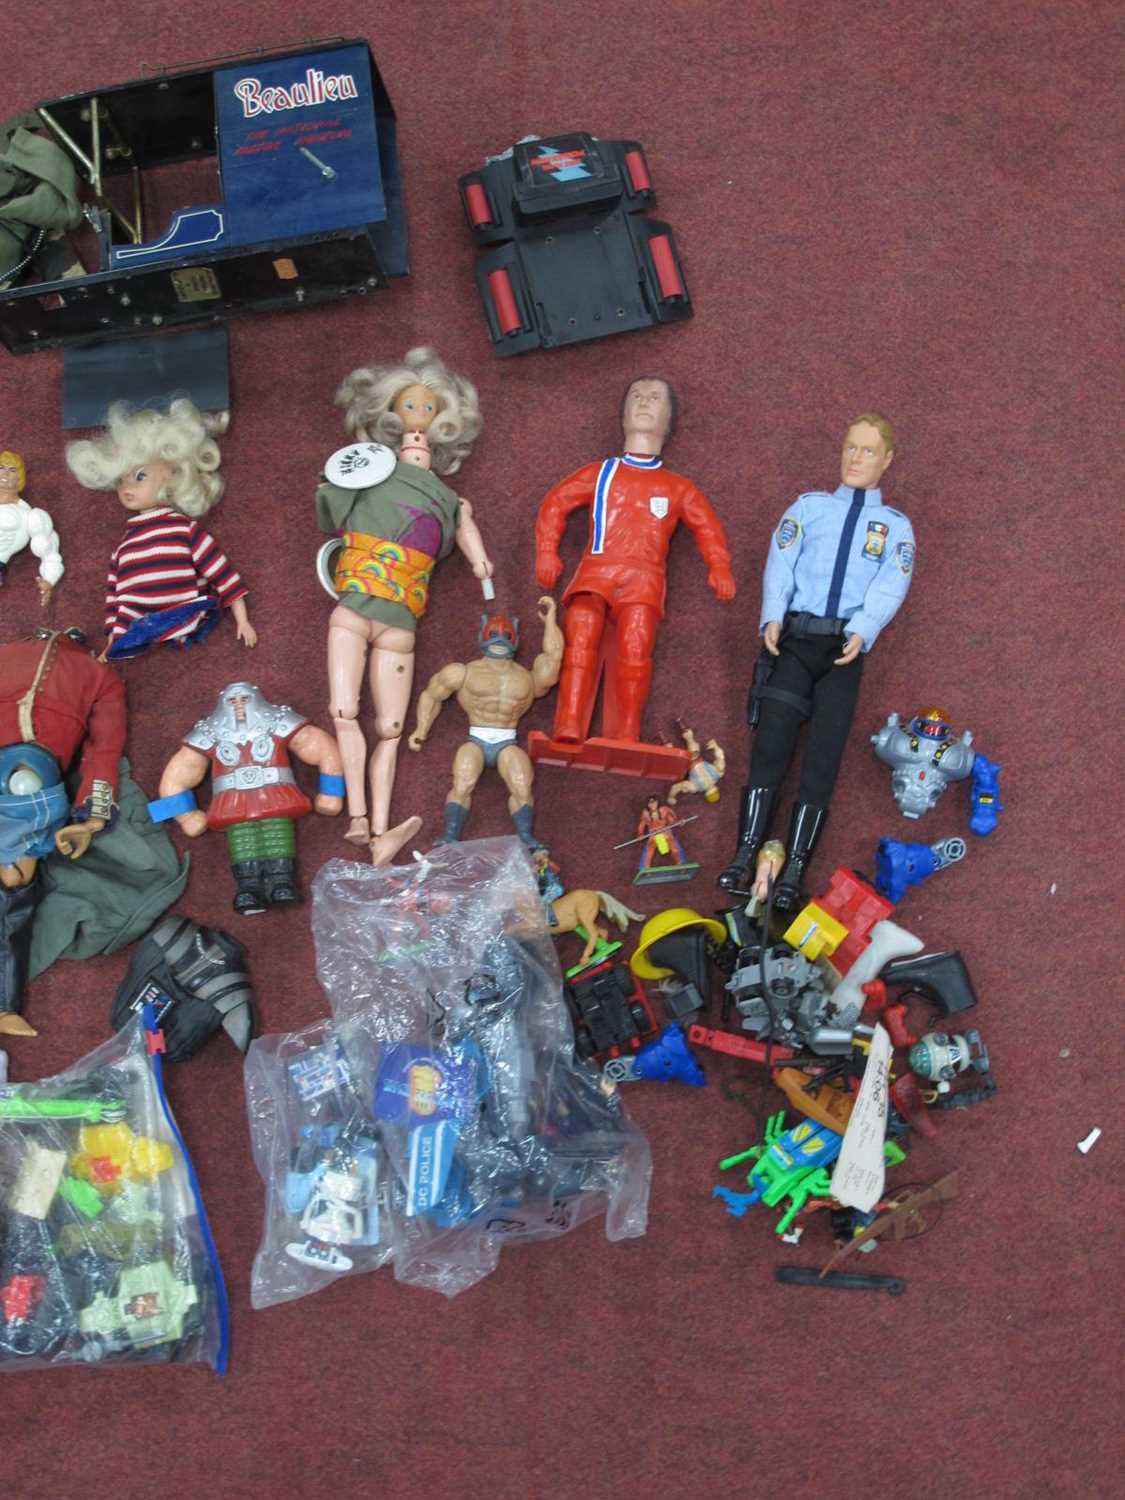 A Quantity of Action Figures, and similar items. - Image 4 of 4